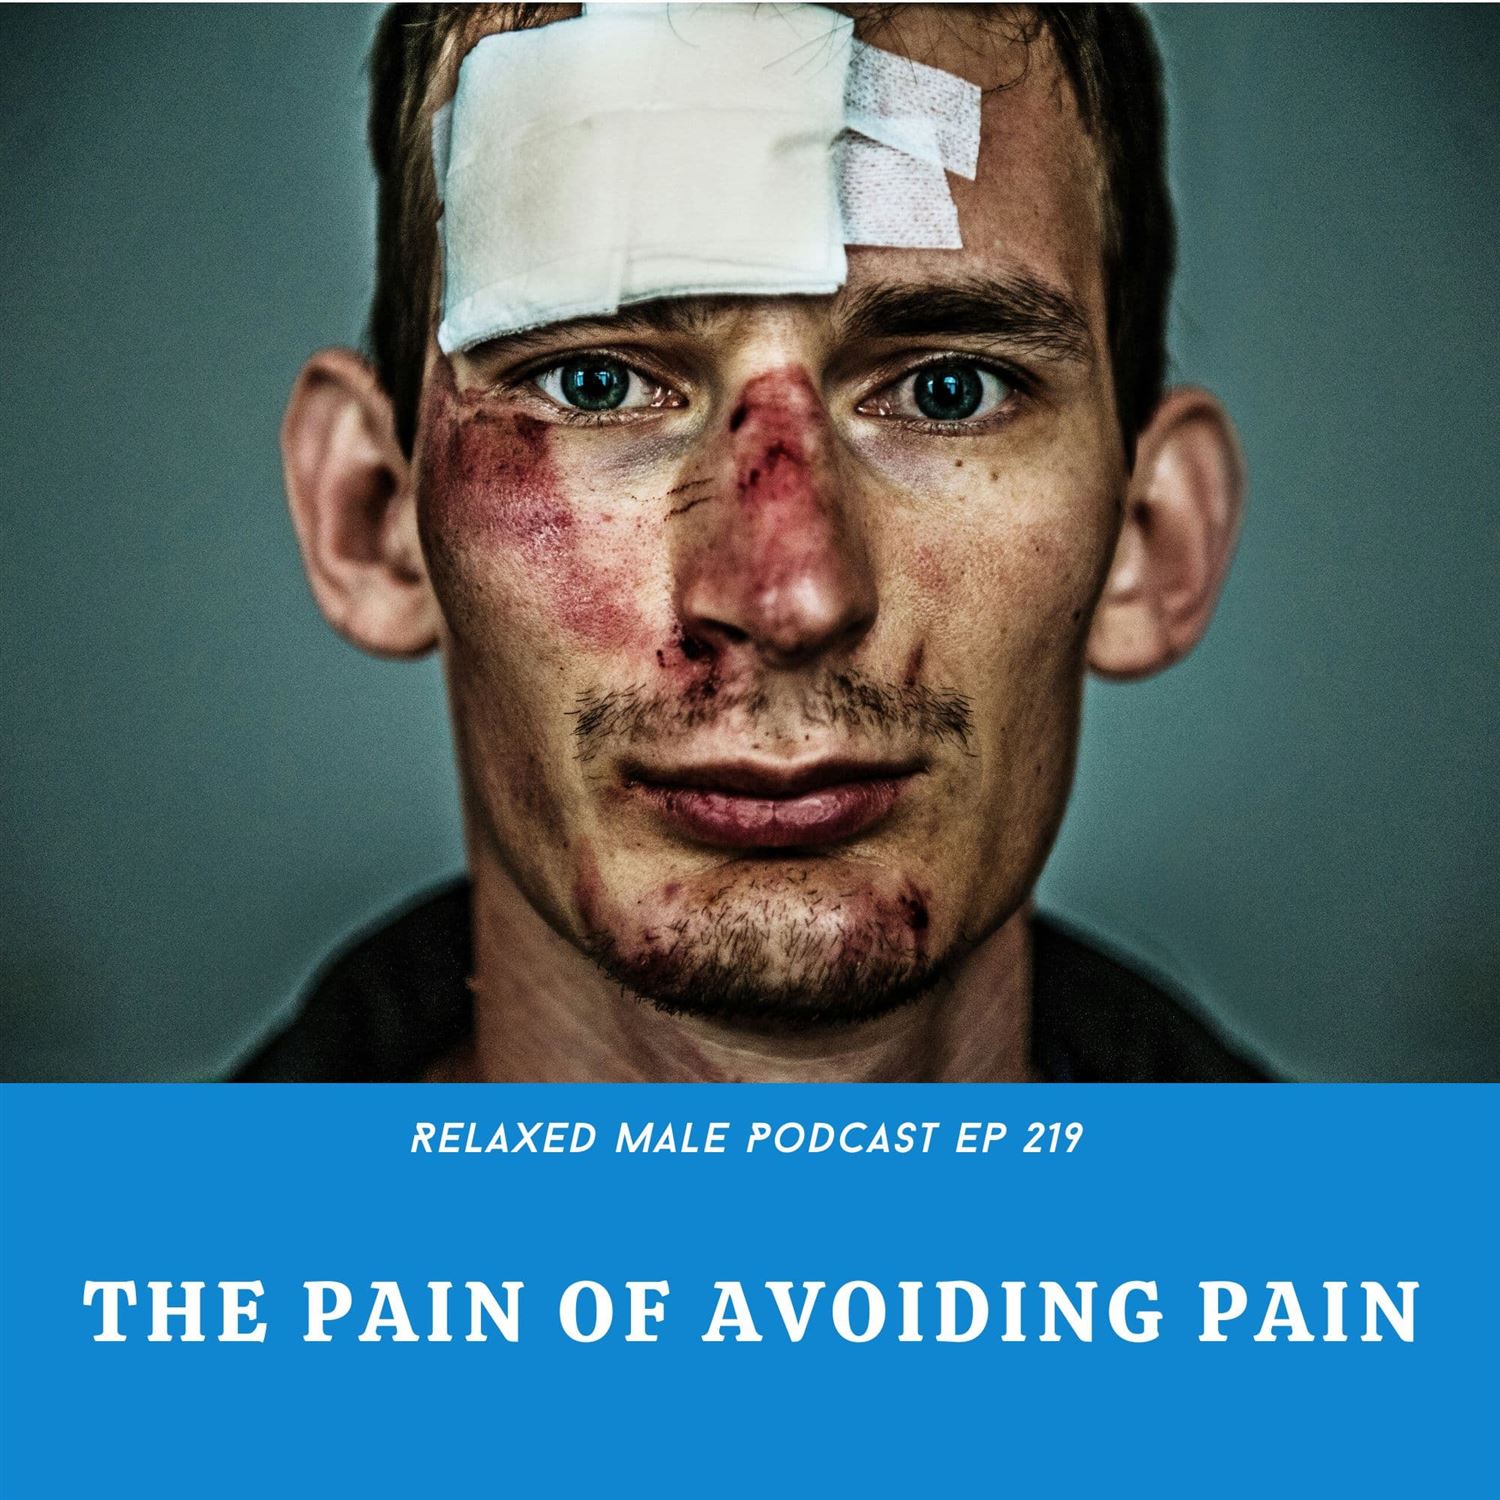 Avoiding Pain Isn't Going to Bring You Pleasure